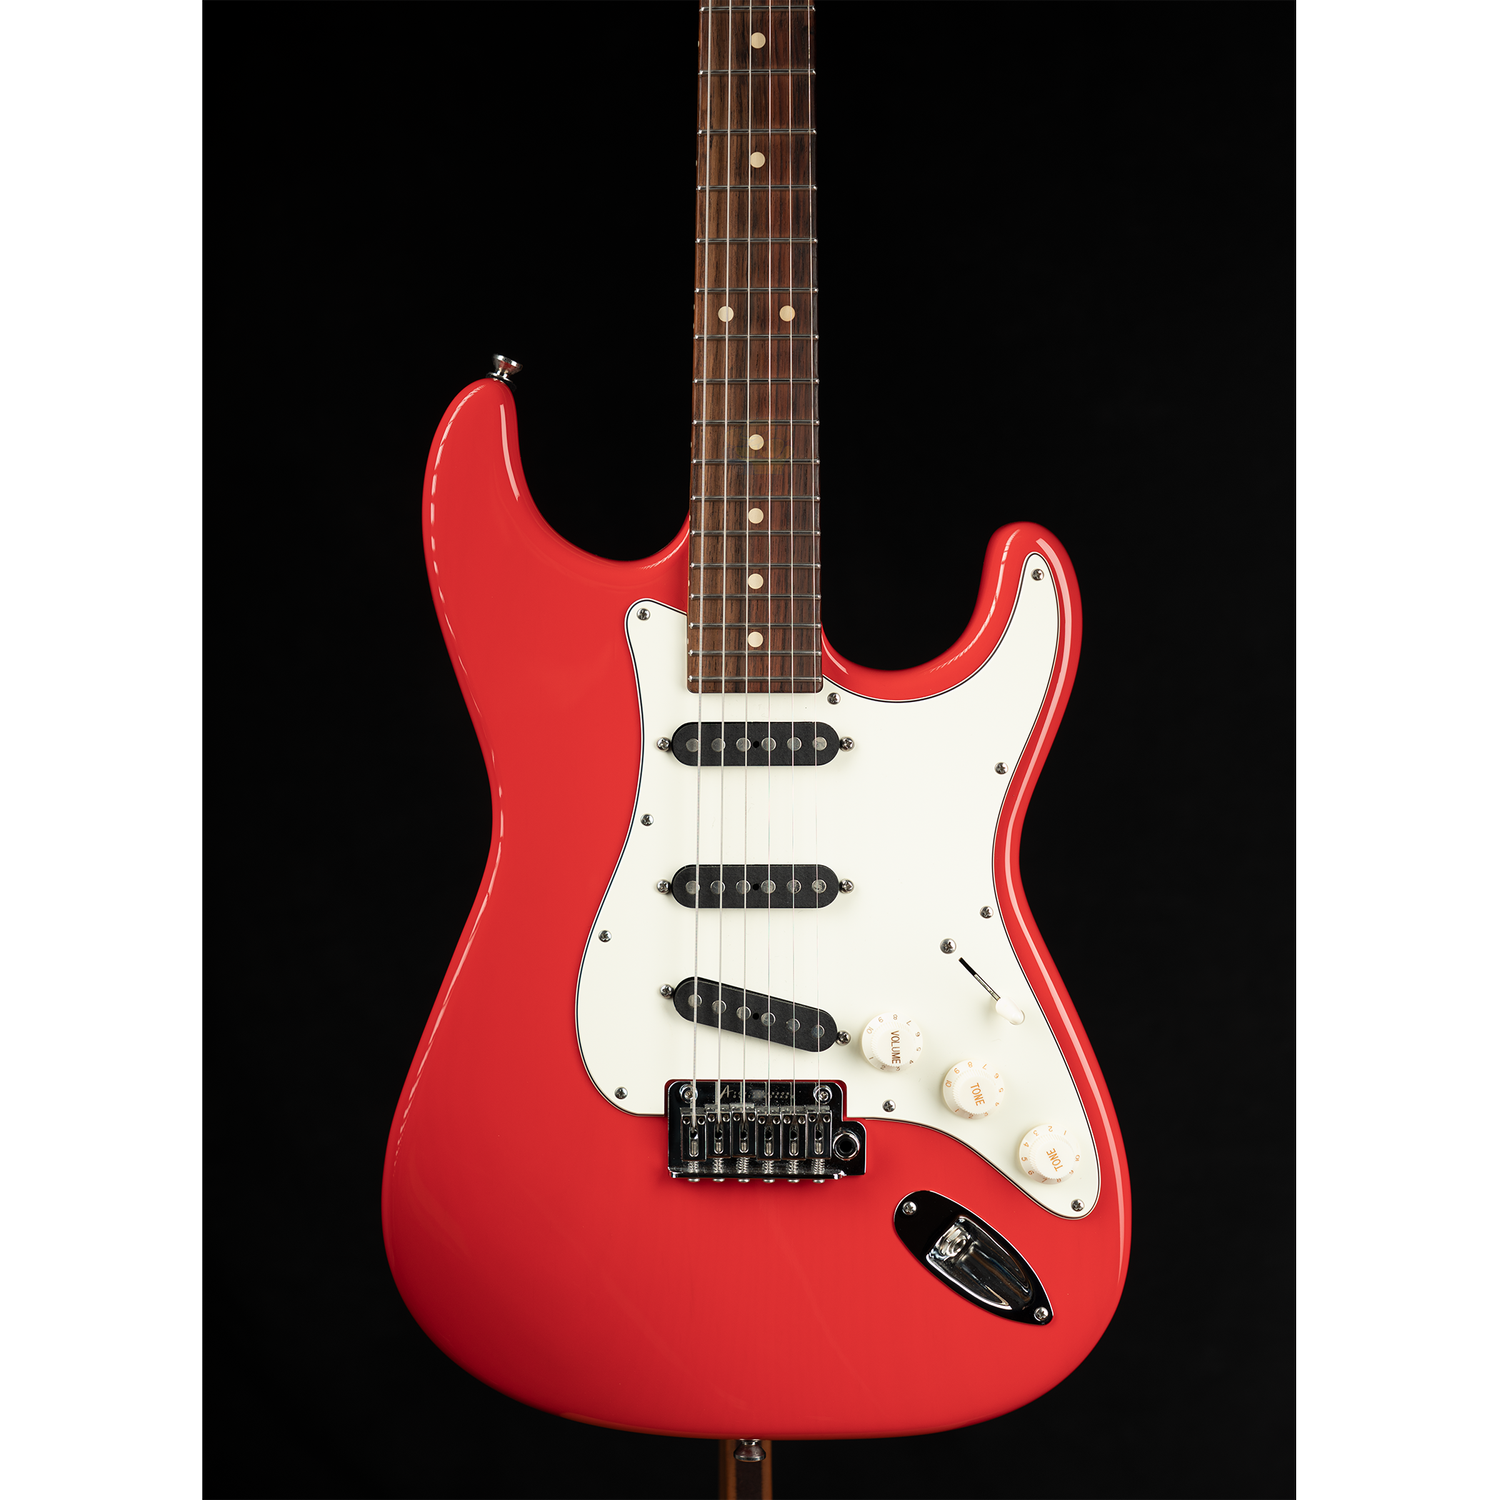 Used 2021 TOM ANDERSON ICON CLASSIC FIESTA RED — The